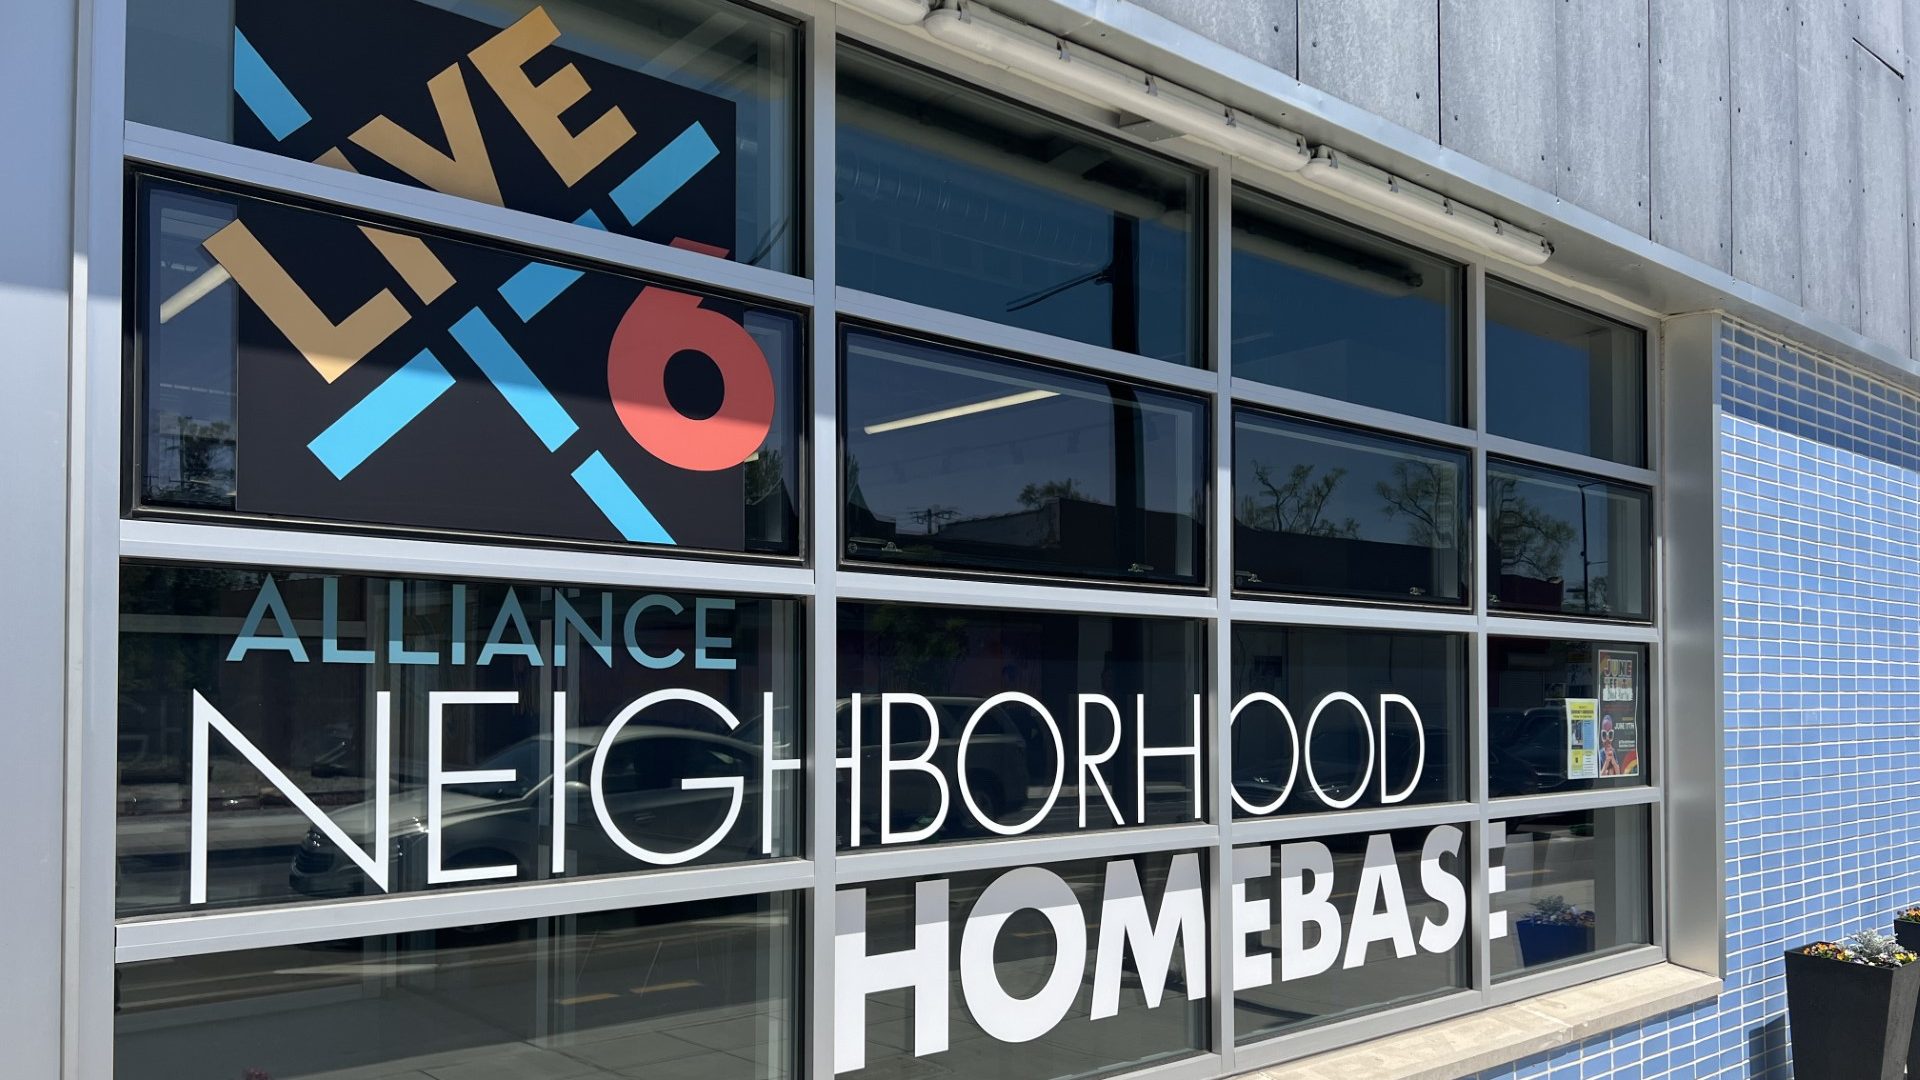 Live6 Alliance Neighborhood HomeBase is a community gathering space and shared office space for the Live6 Alliance and other local nonprofits.